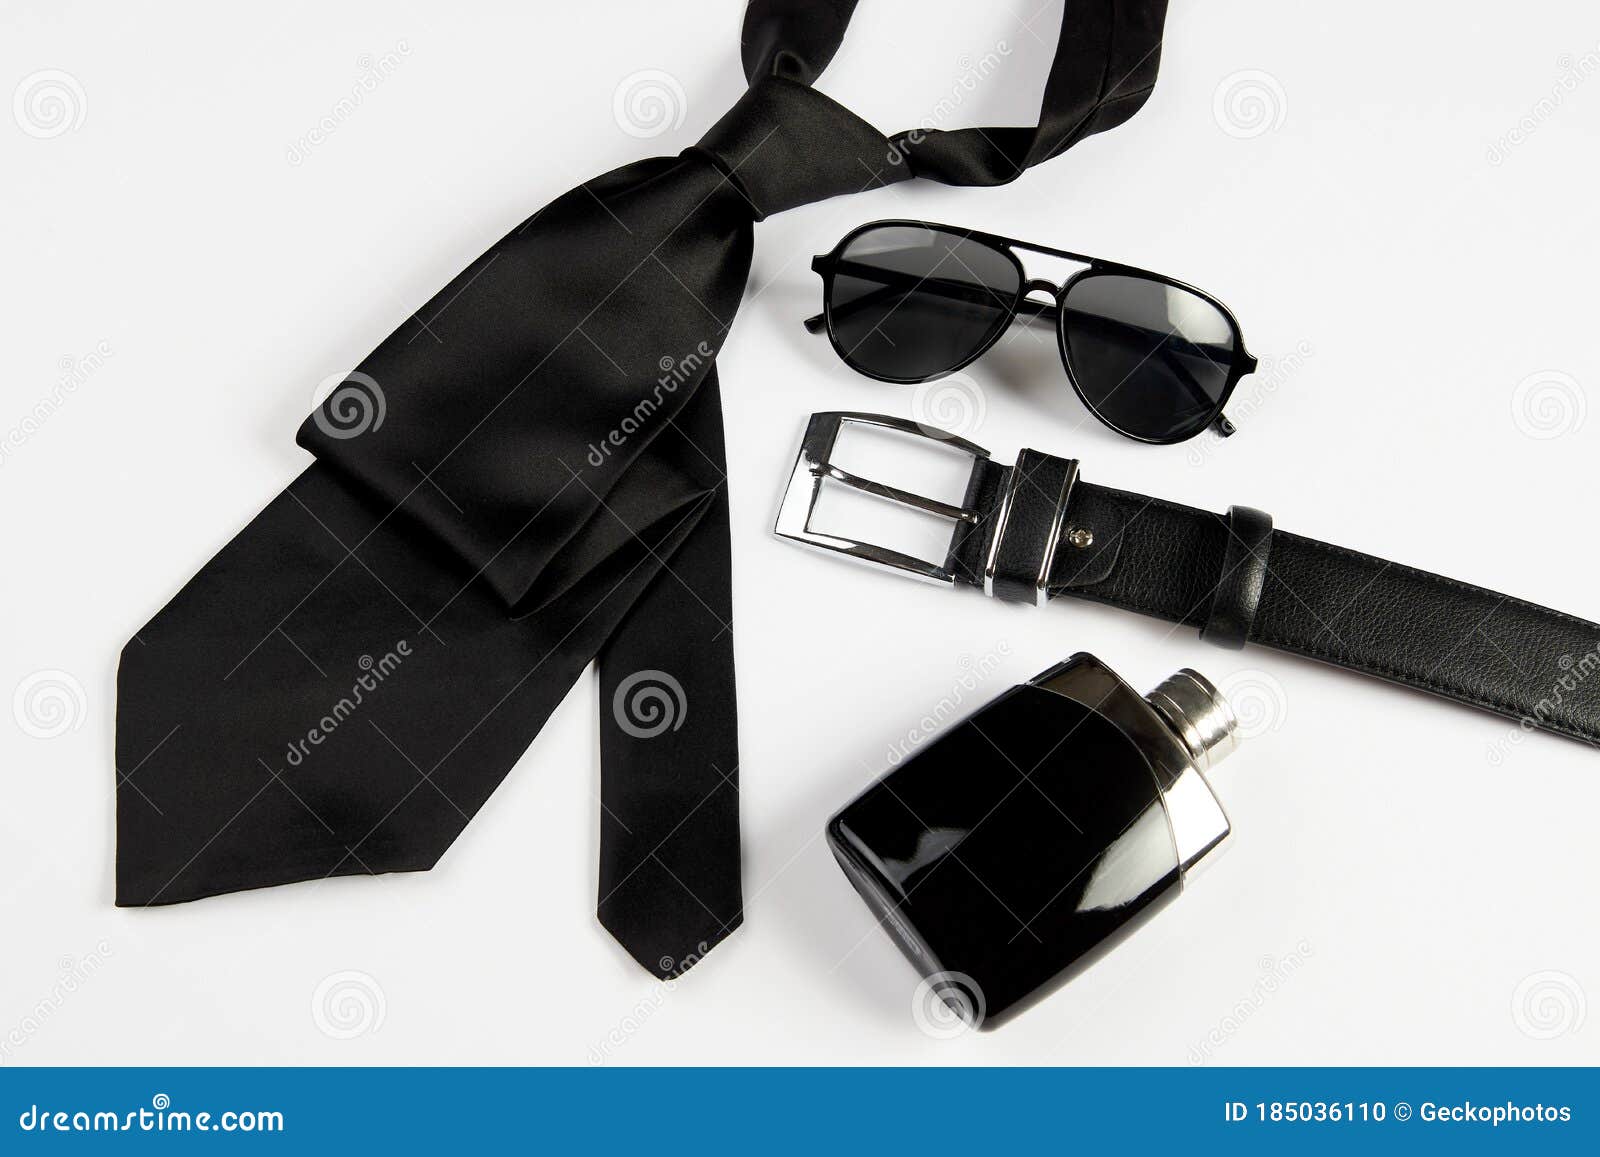 38,977 Accessories Stock & Royalty-Free Stock Photos from Dreamstime